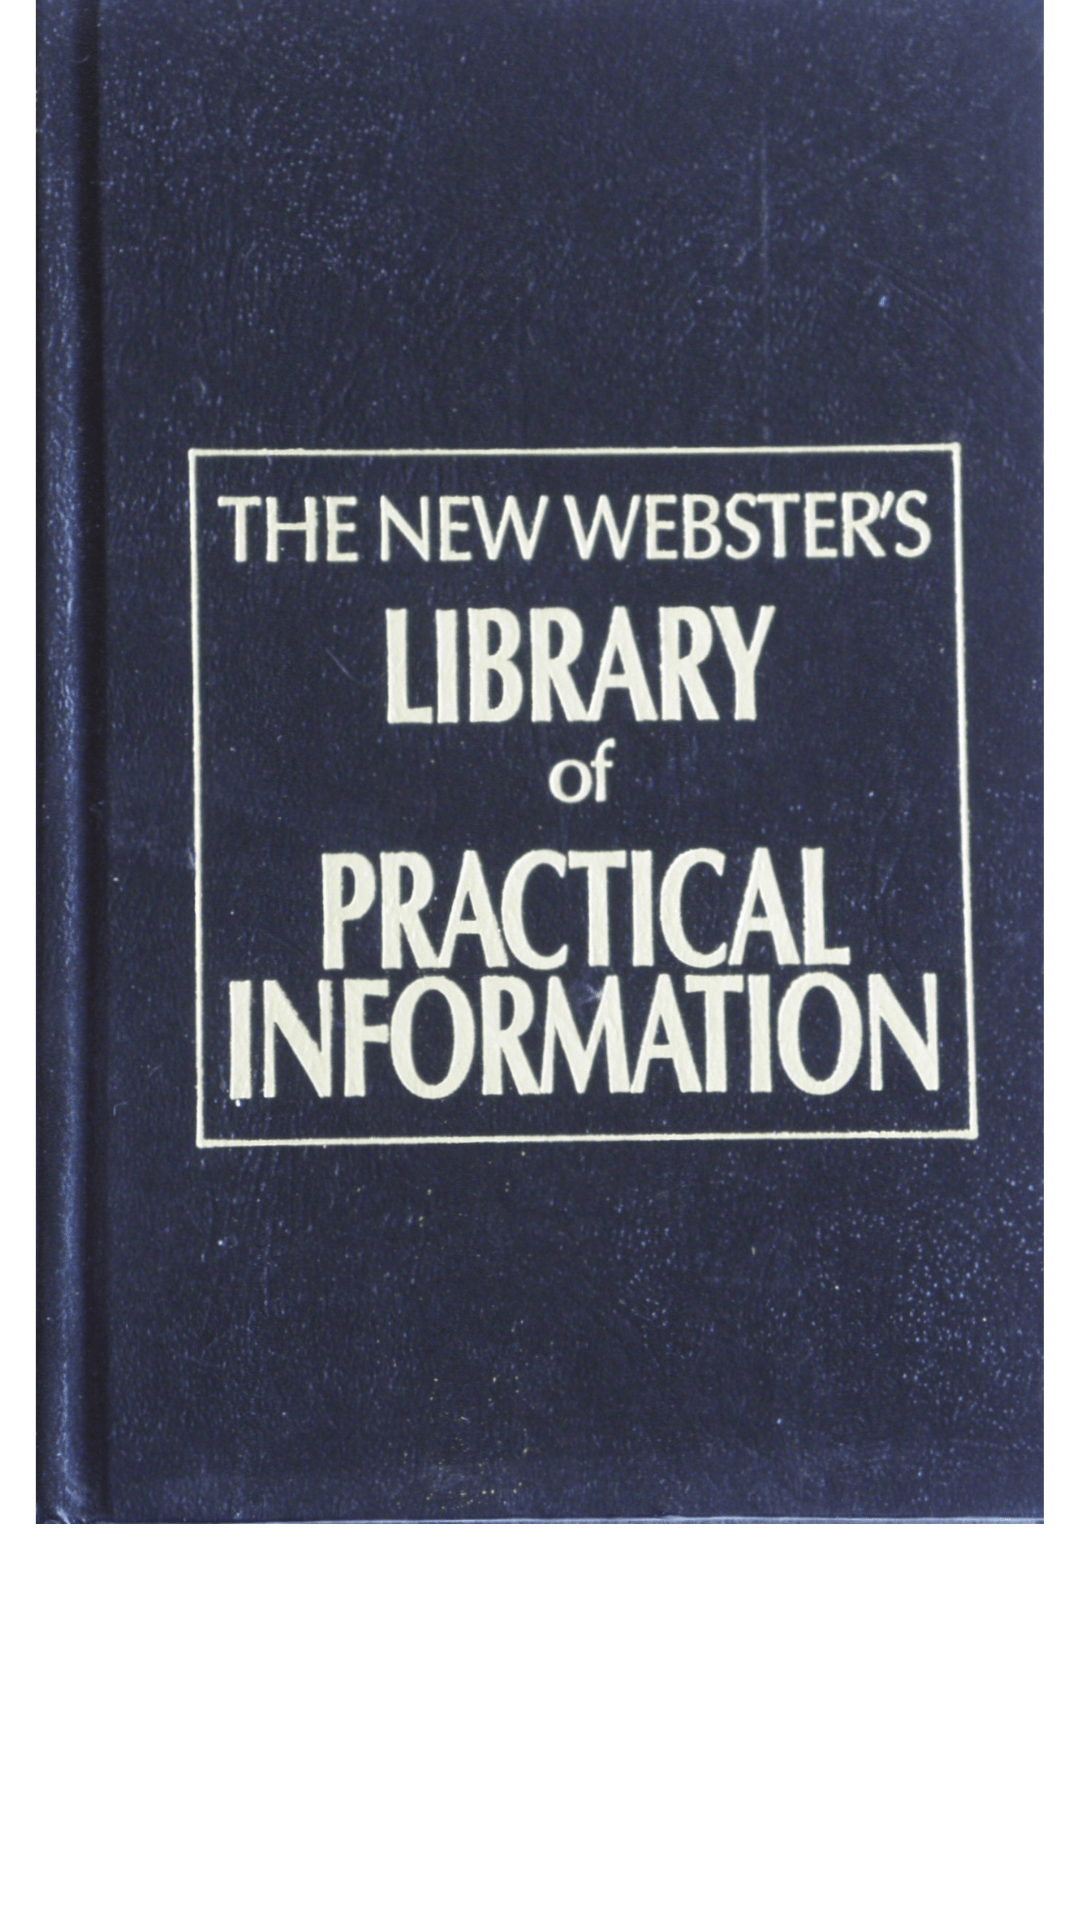 The New Webster's Library Of Practical Information